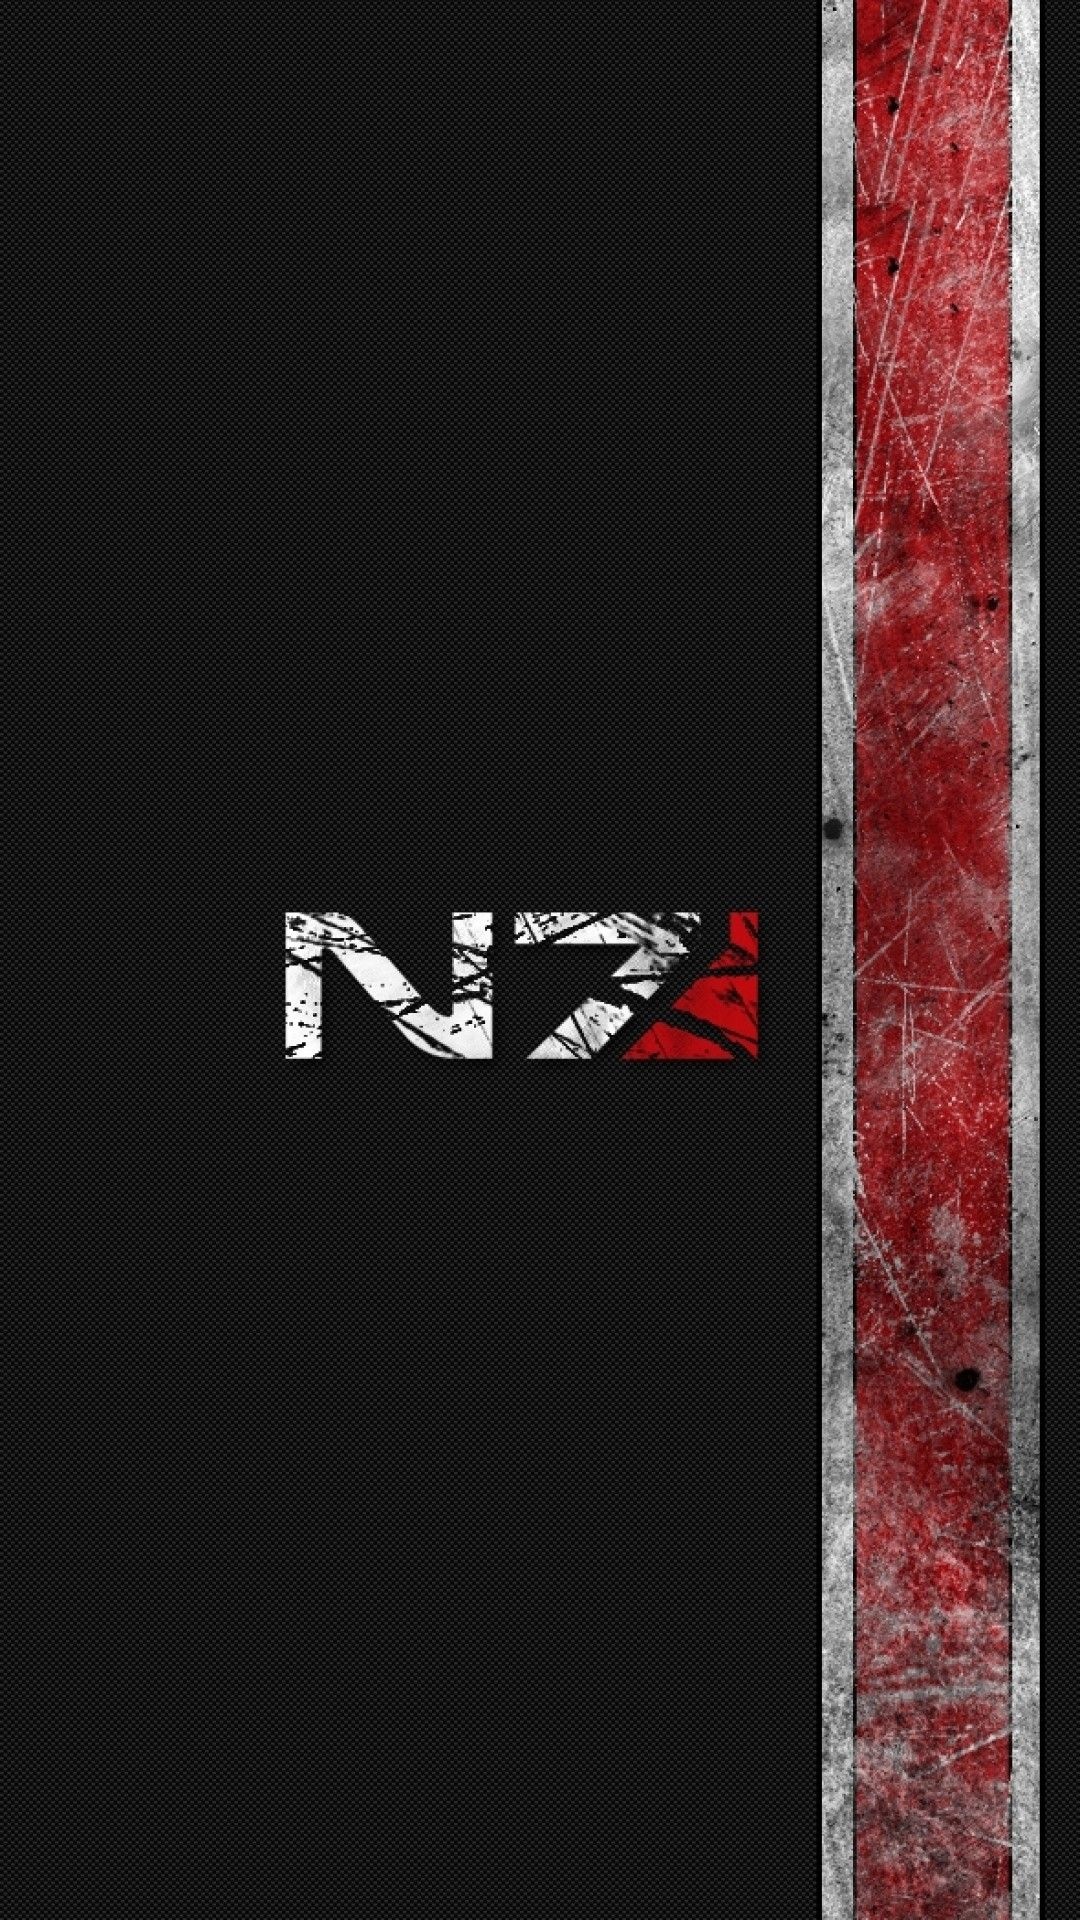 Mass Effect, Phone wallpapers, Unique designs, Must-have for fans, 1080x1920 Full HD Handy